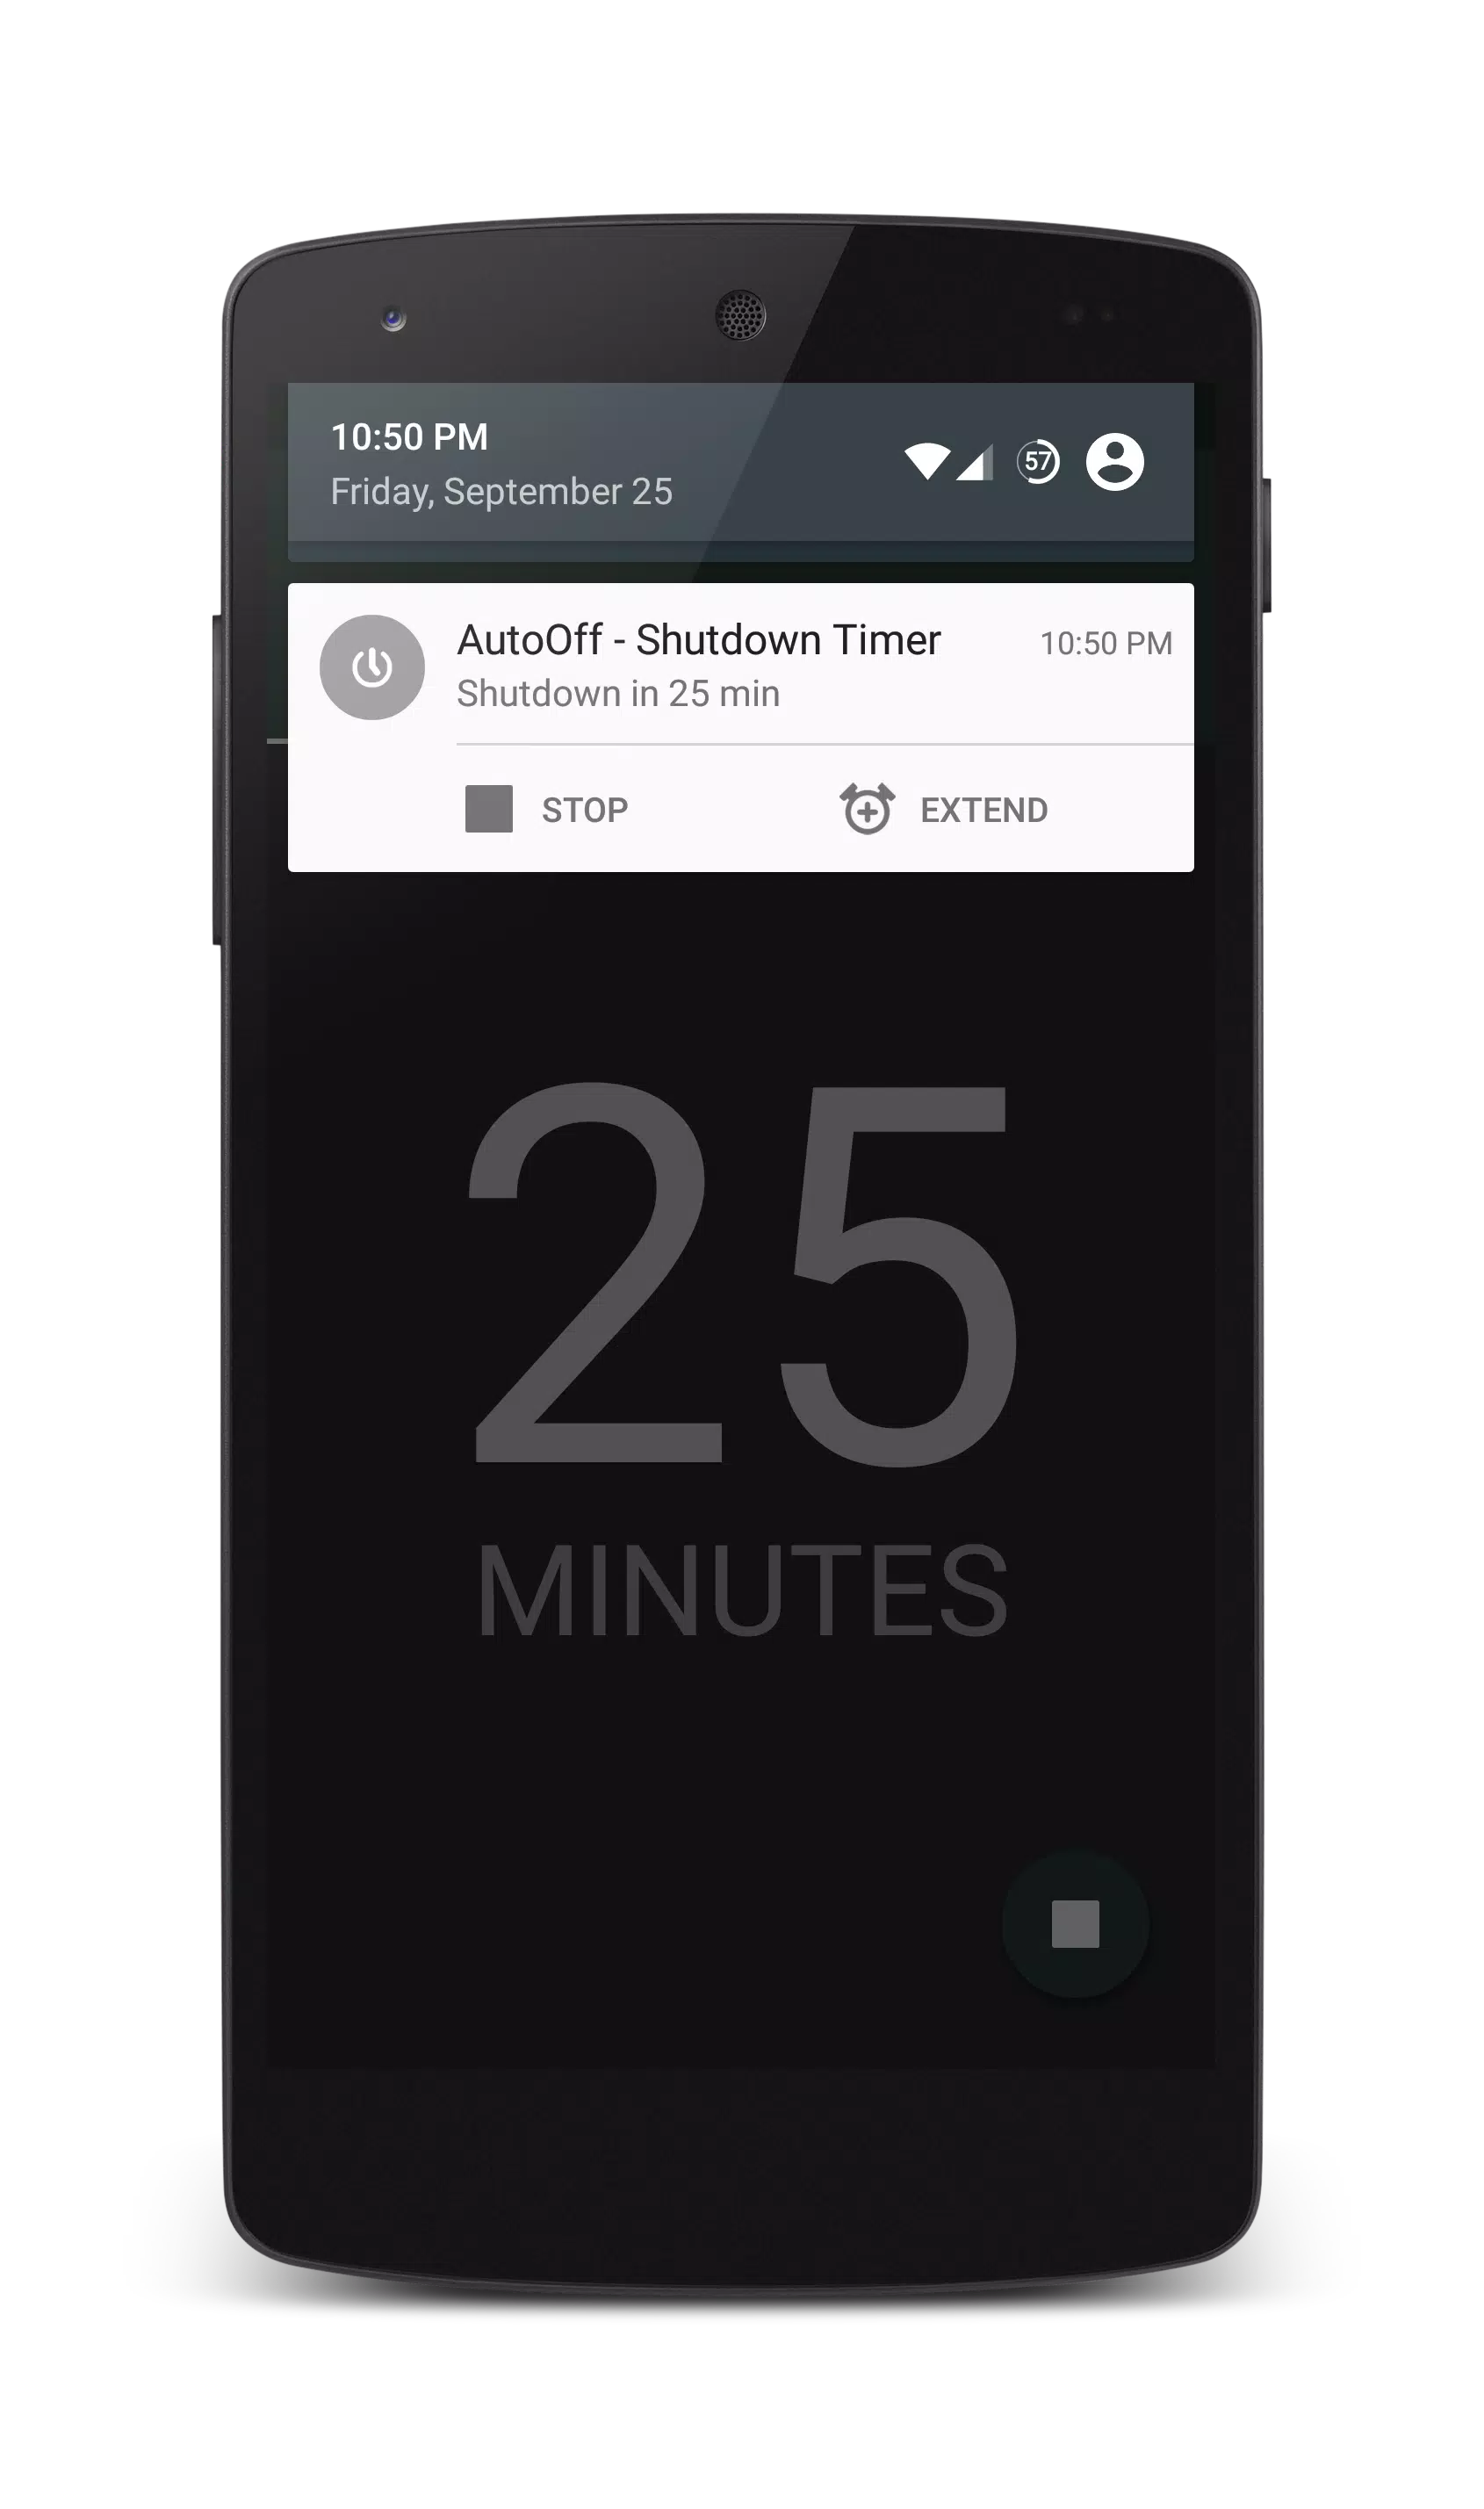 AutoOff - Shutdown Timer for Android - APK Download